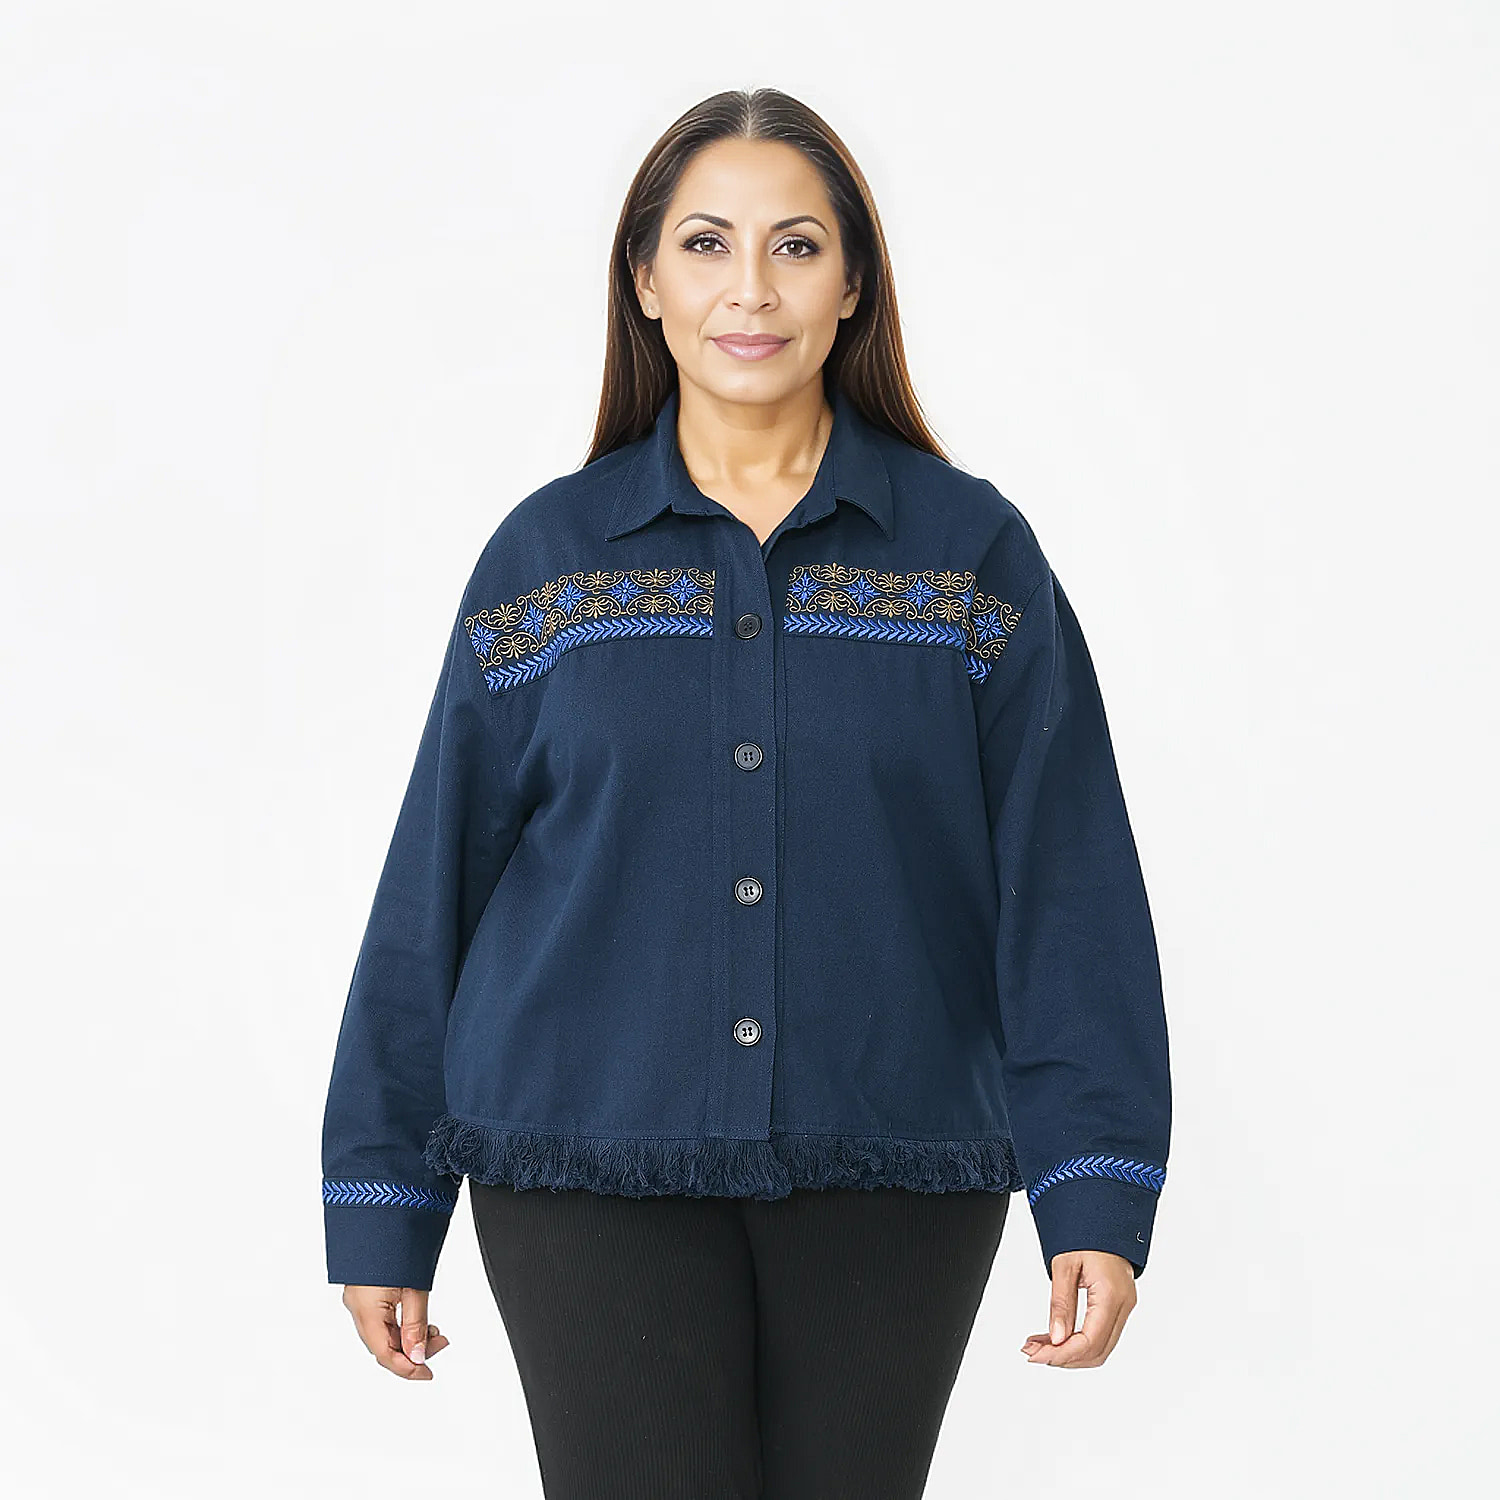 Tamsy 100% Cotton Embroidered Jacket (Size XL,20-22) - Navy